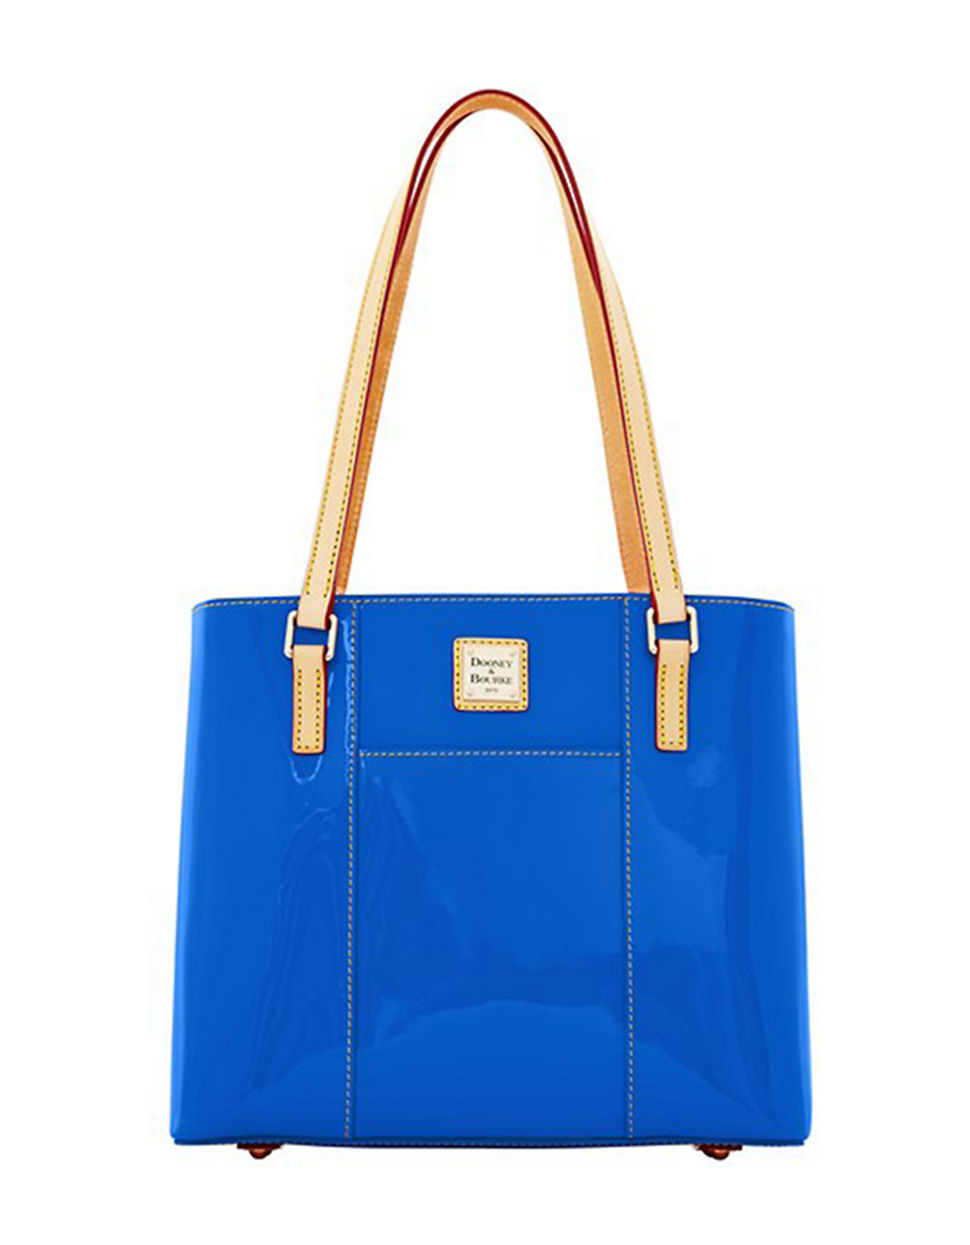 Dooney & Bourke Lexington Patent Leather Small Shopper Tote Bag in Blue | Lyst